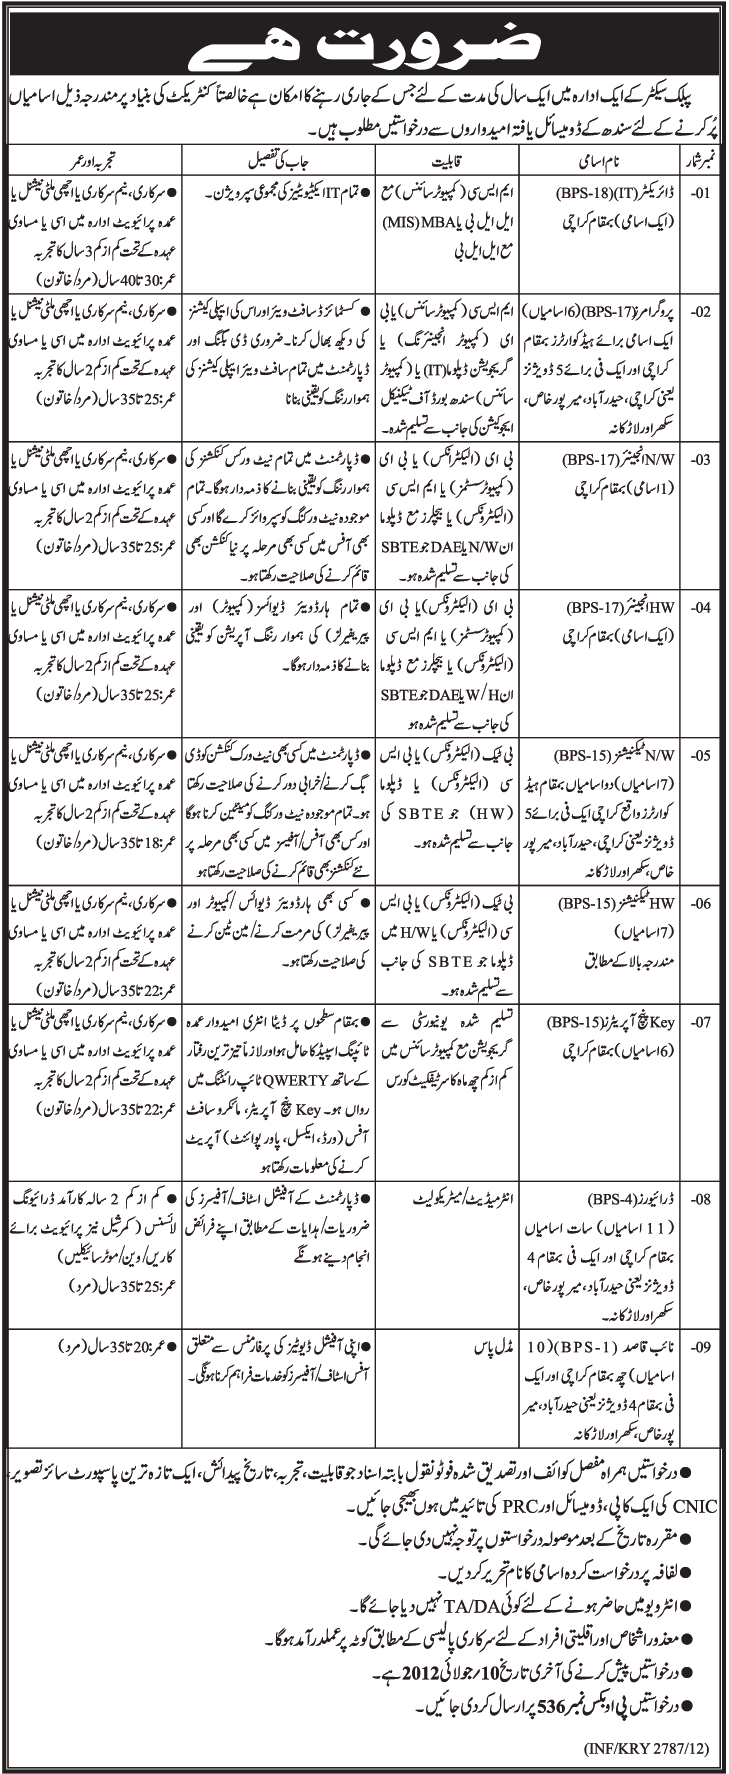 Management, Engineering and Technical Staff Required by Public Sector Organization